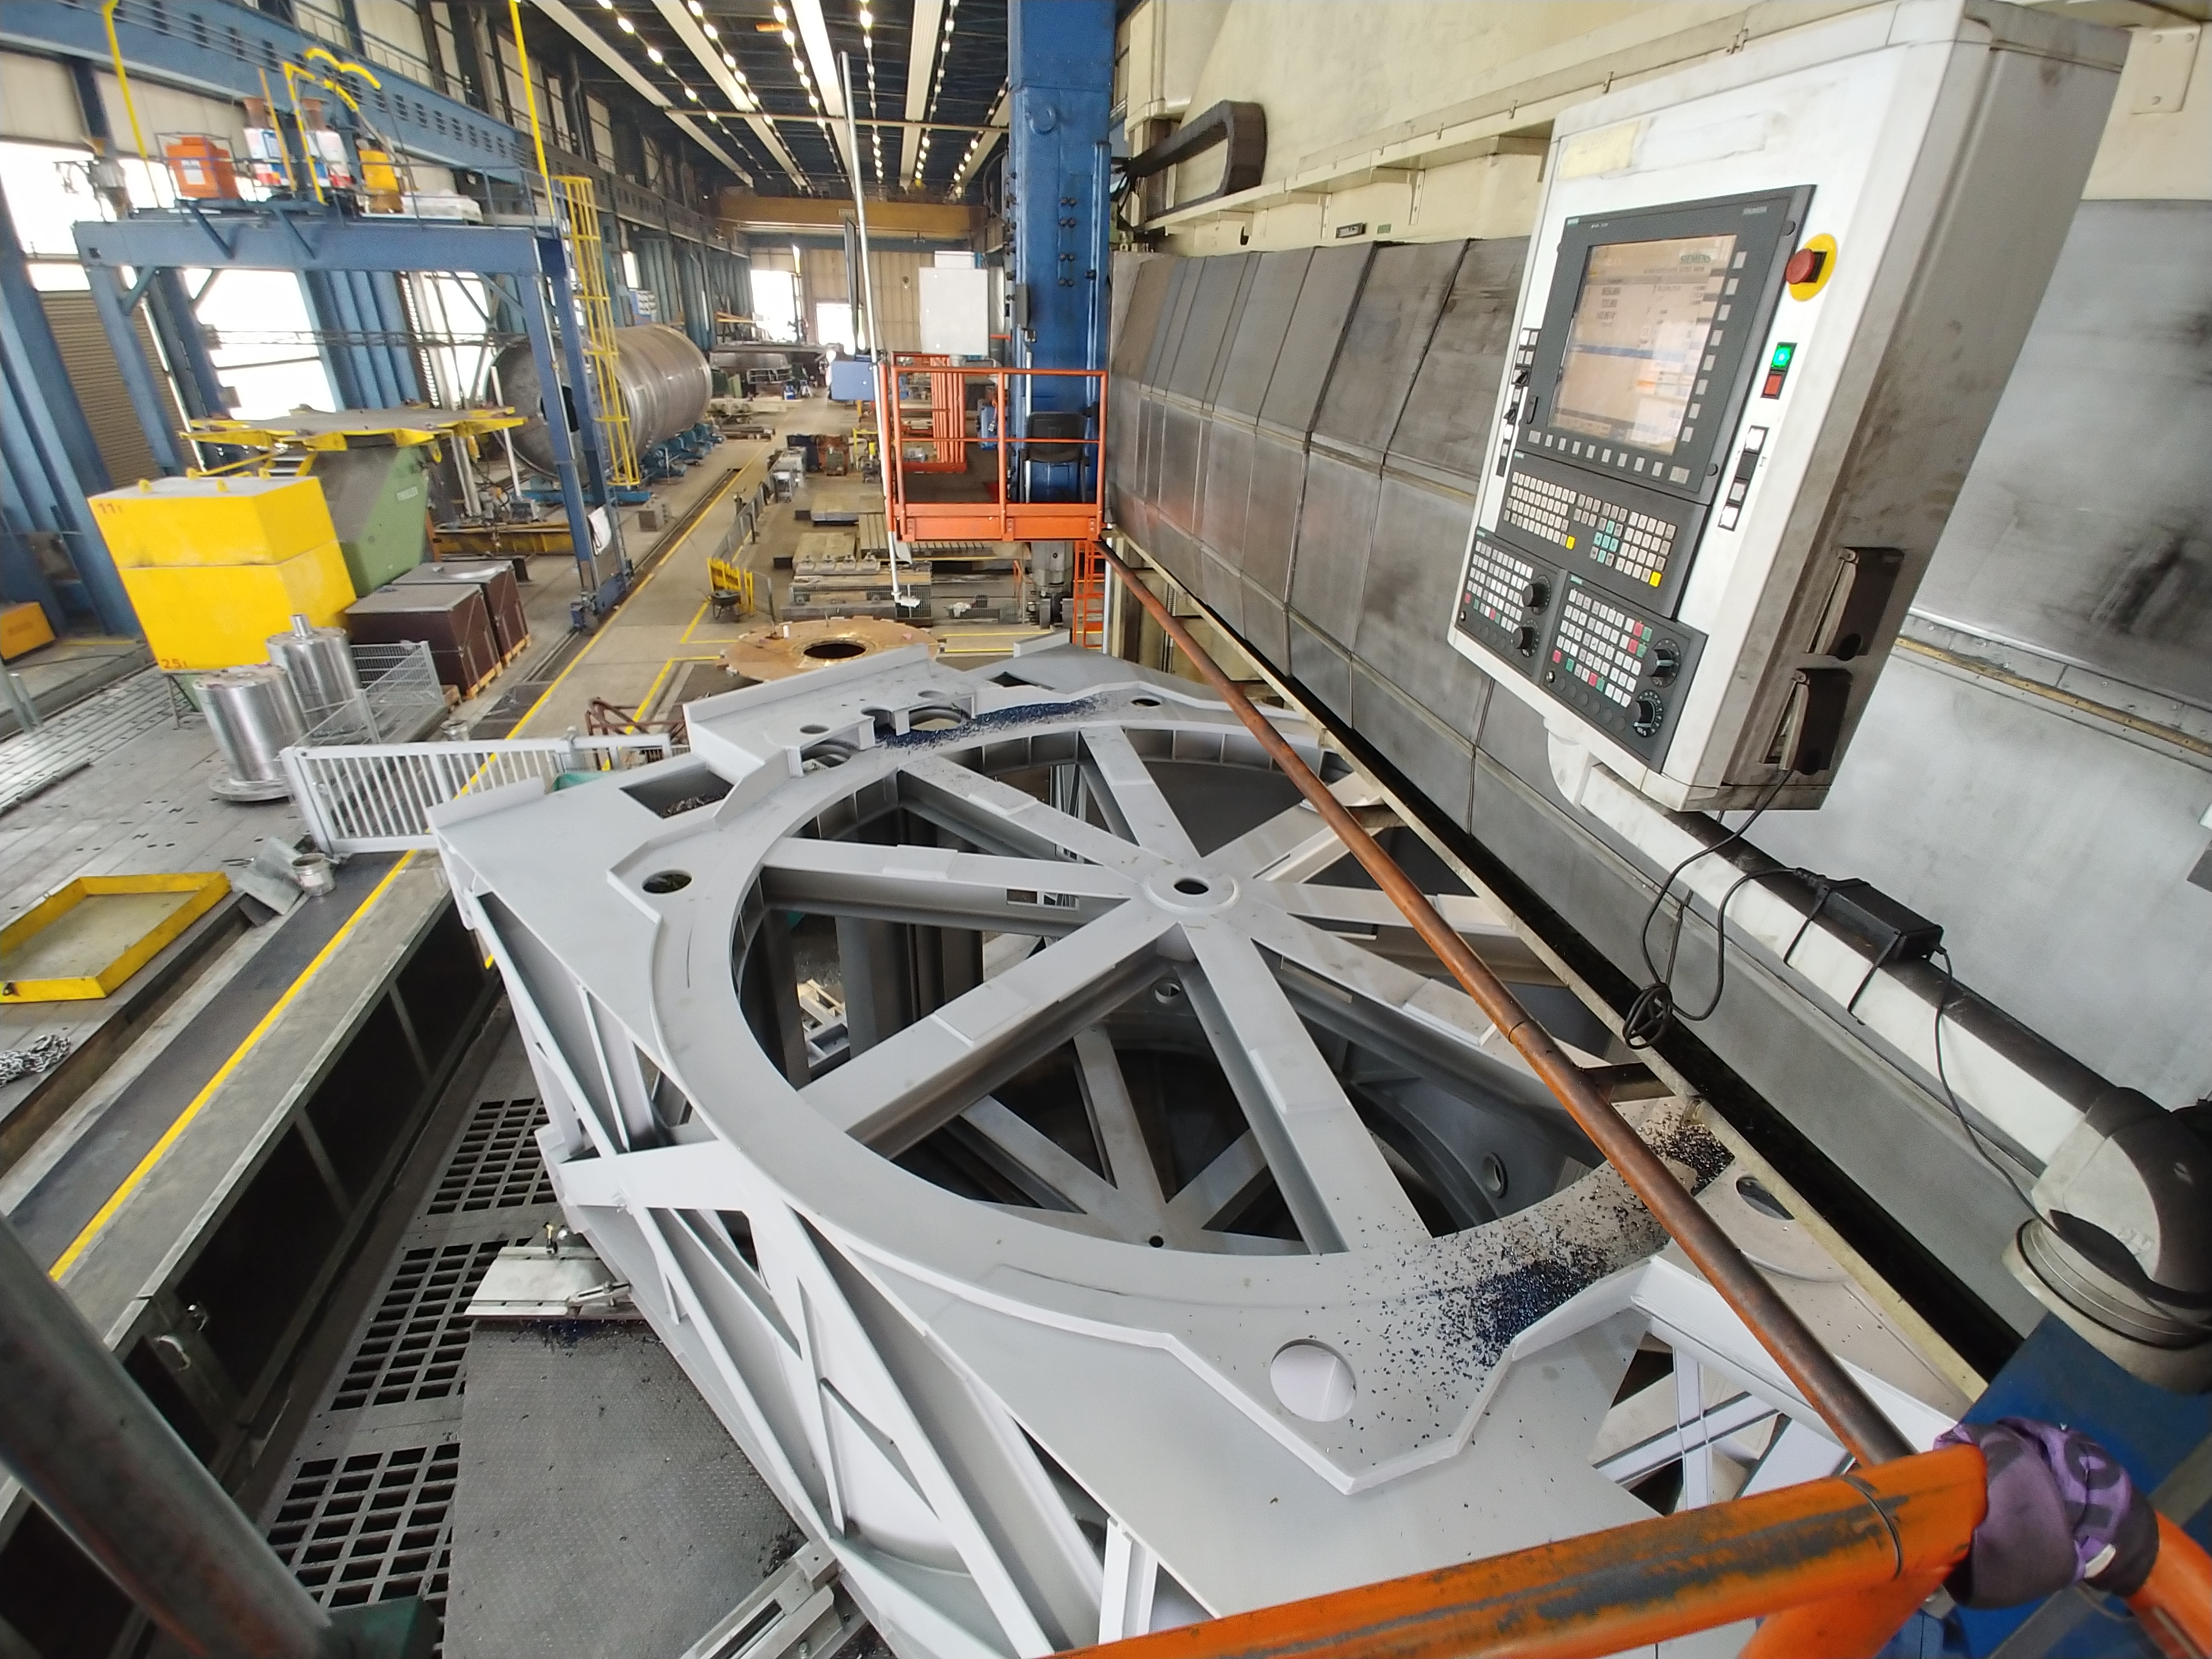 Milling of the gearbox and main bearing interfaces on the central section of the telescope traverse welded assembly. Credit: CCAT Observatory, Inc.